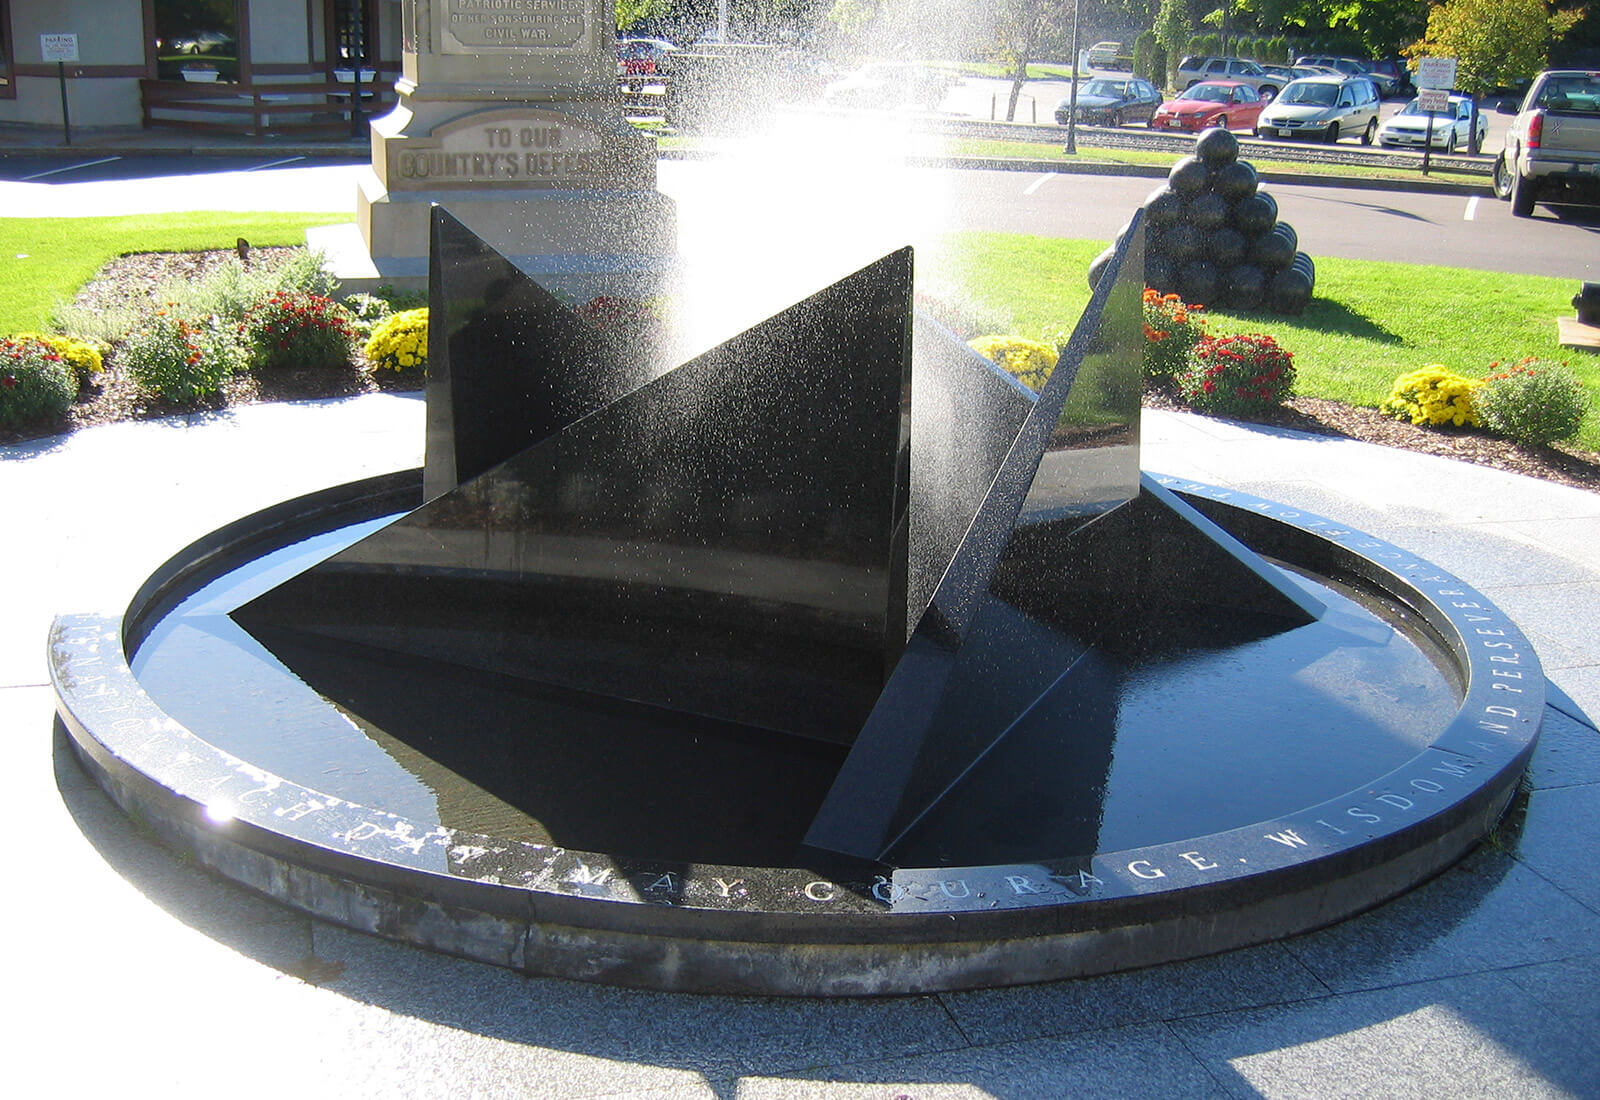 The Veteran's Memorial Fountain in Laconia, New Hampshire features Cambrian Black granite and was installed by Belknap Landscaping